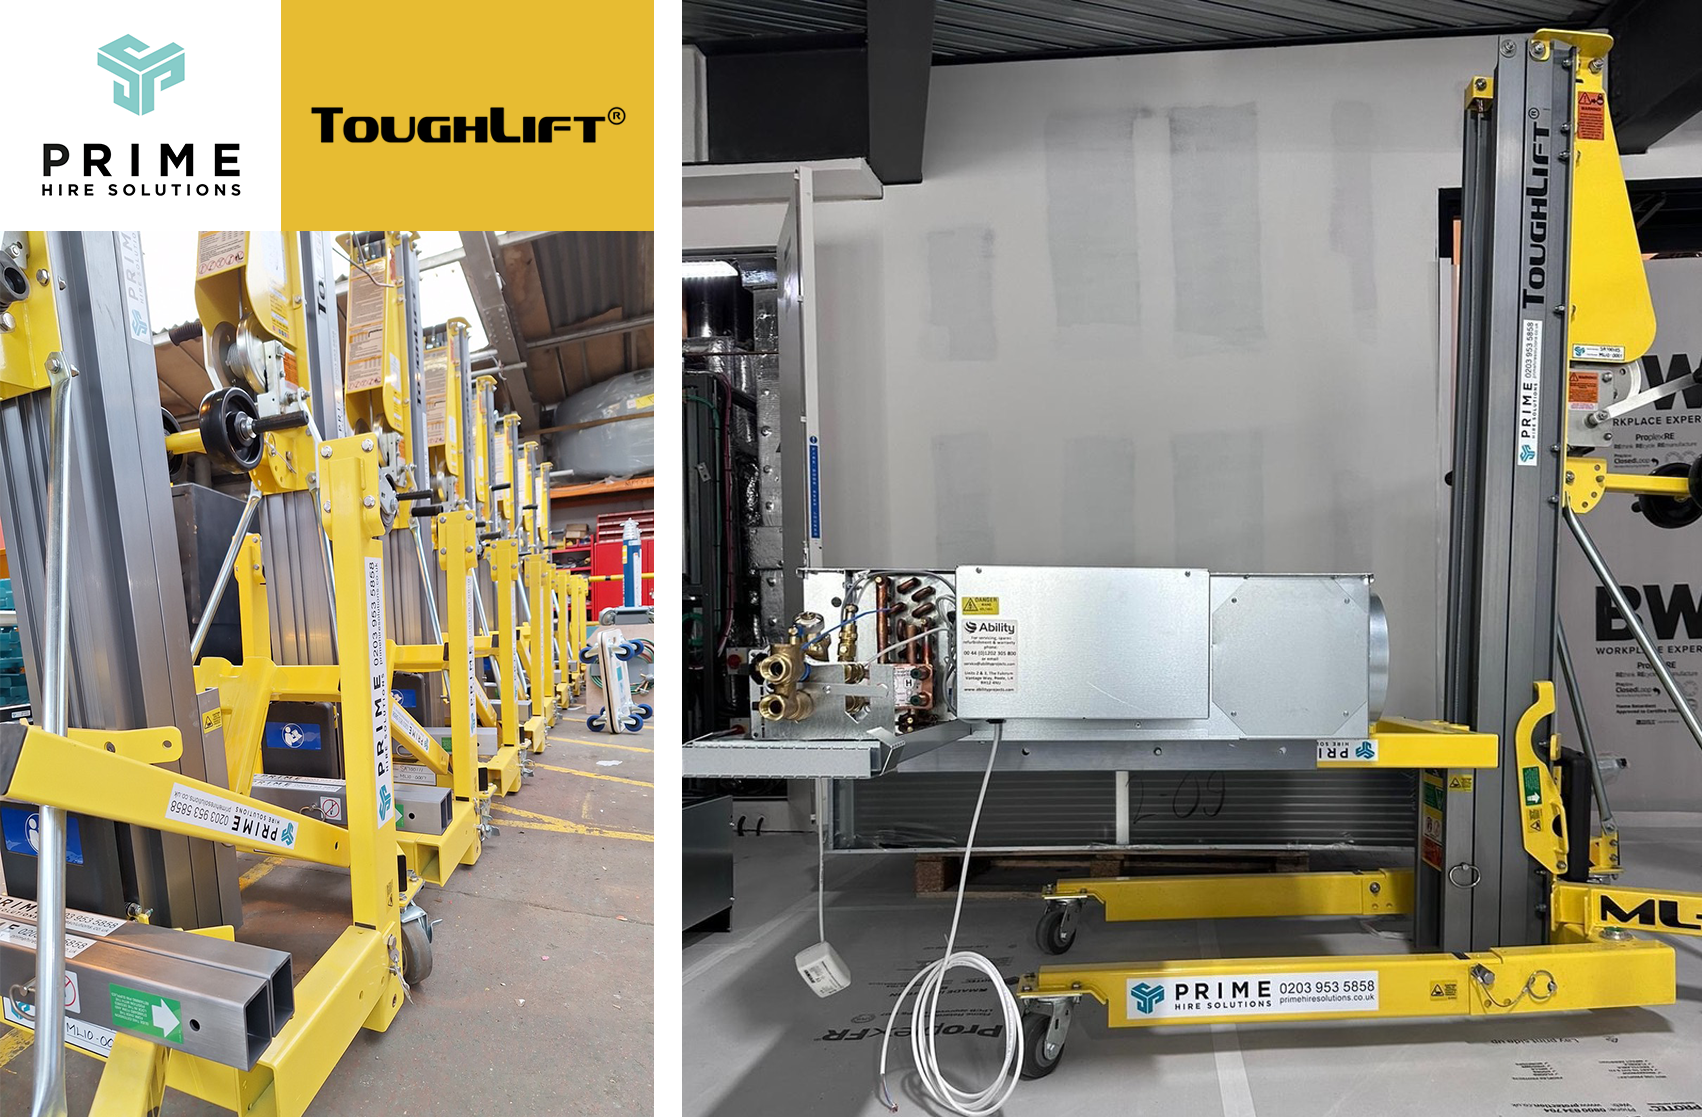 Start as you mean to go on – new rental specialist selects ToughLift quality